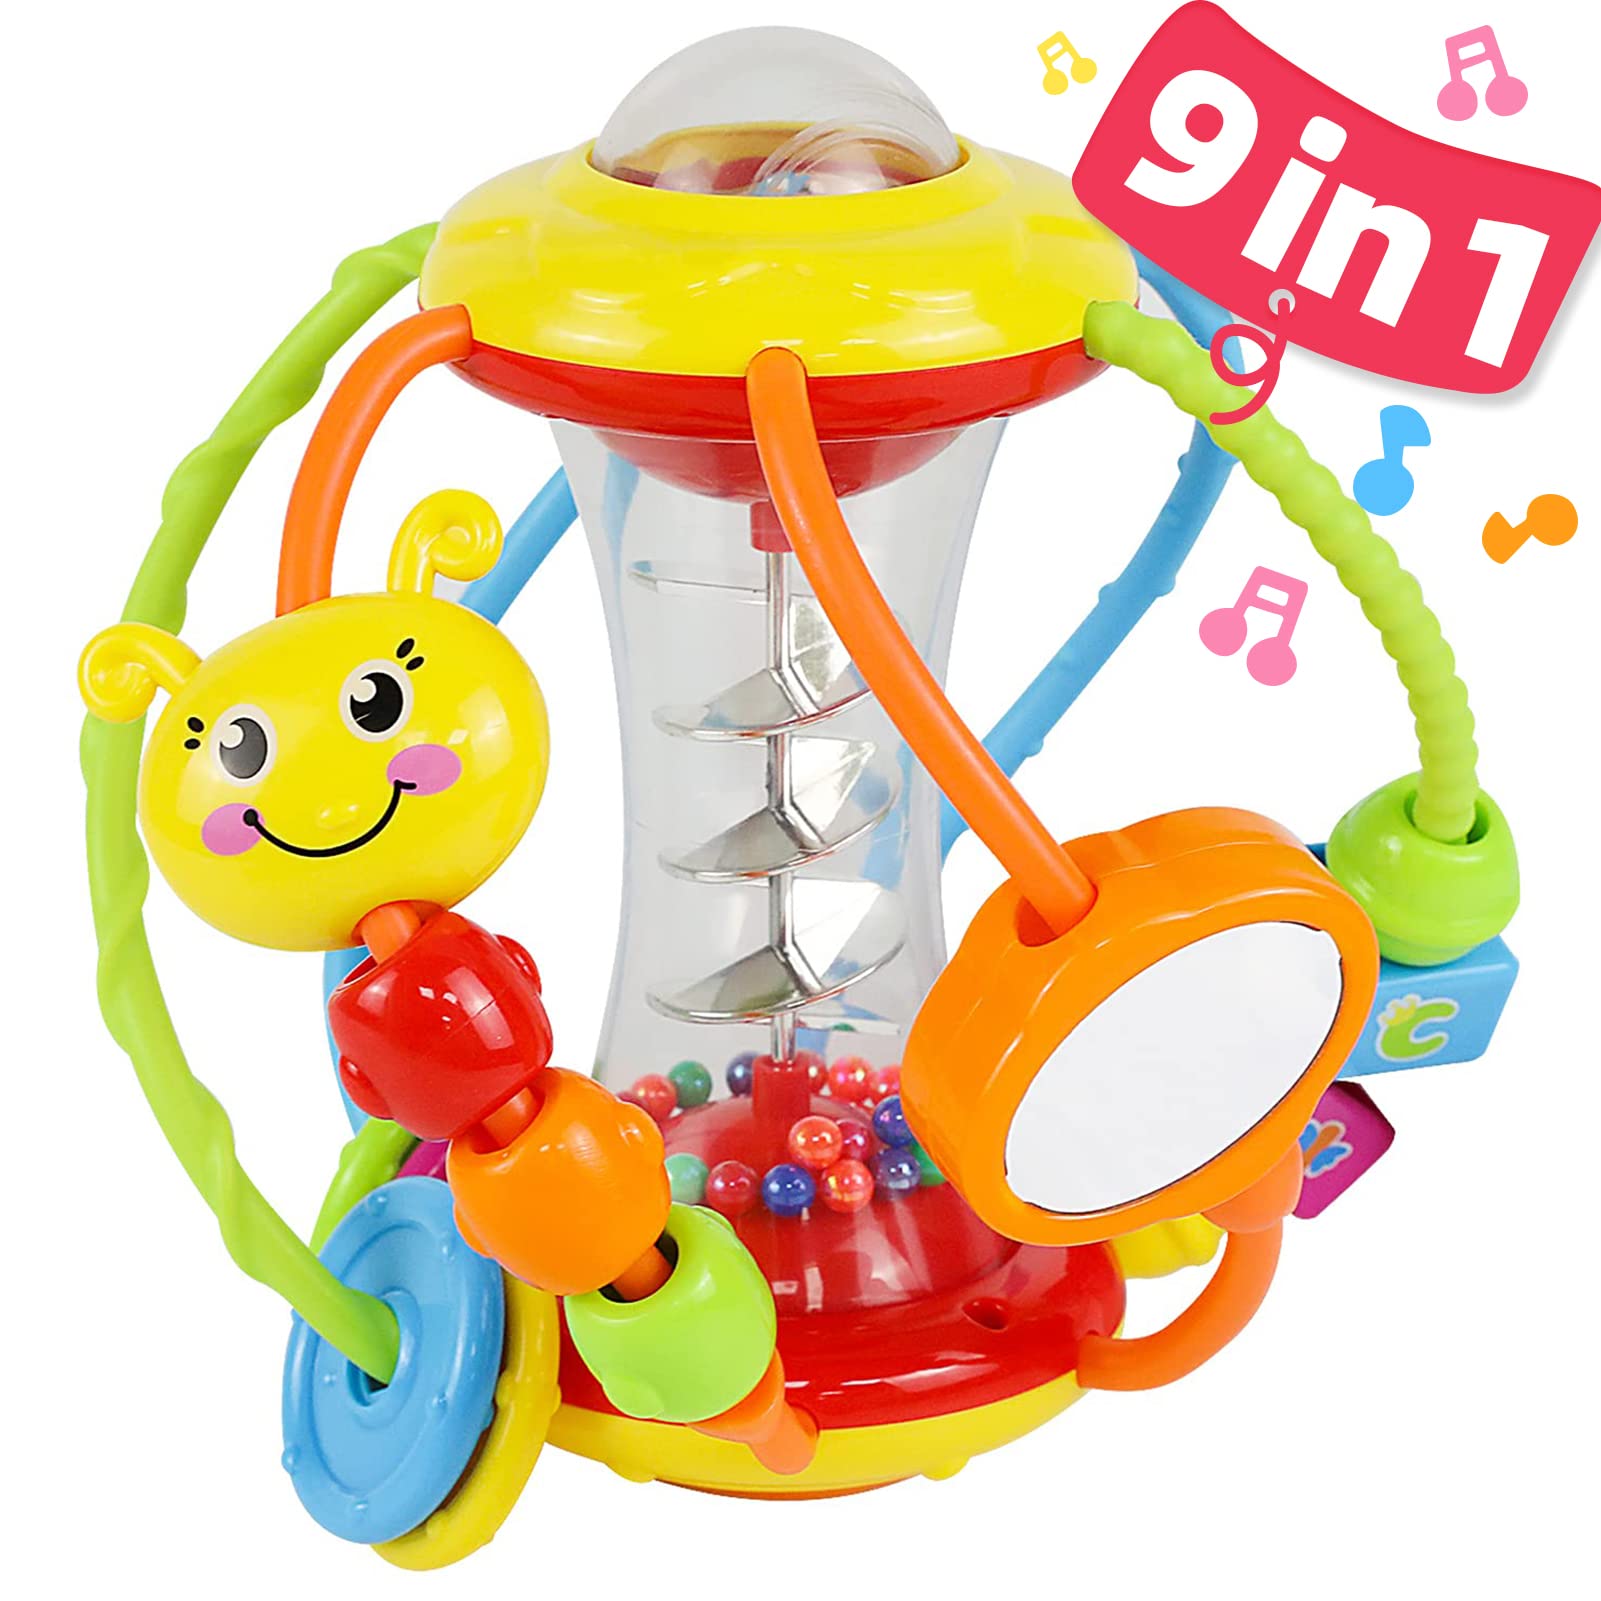 Baby Toys 0-6 Months - Baby Toys 6 to 12 Months Rattles with Mirror Spinner  Beads, Activity Ball Infant Toys, Shaker, Grab Rattle for Baby Girl Boy  Newborn, Birthday, Christmas Gift Baby Rattle Ball